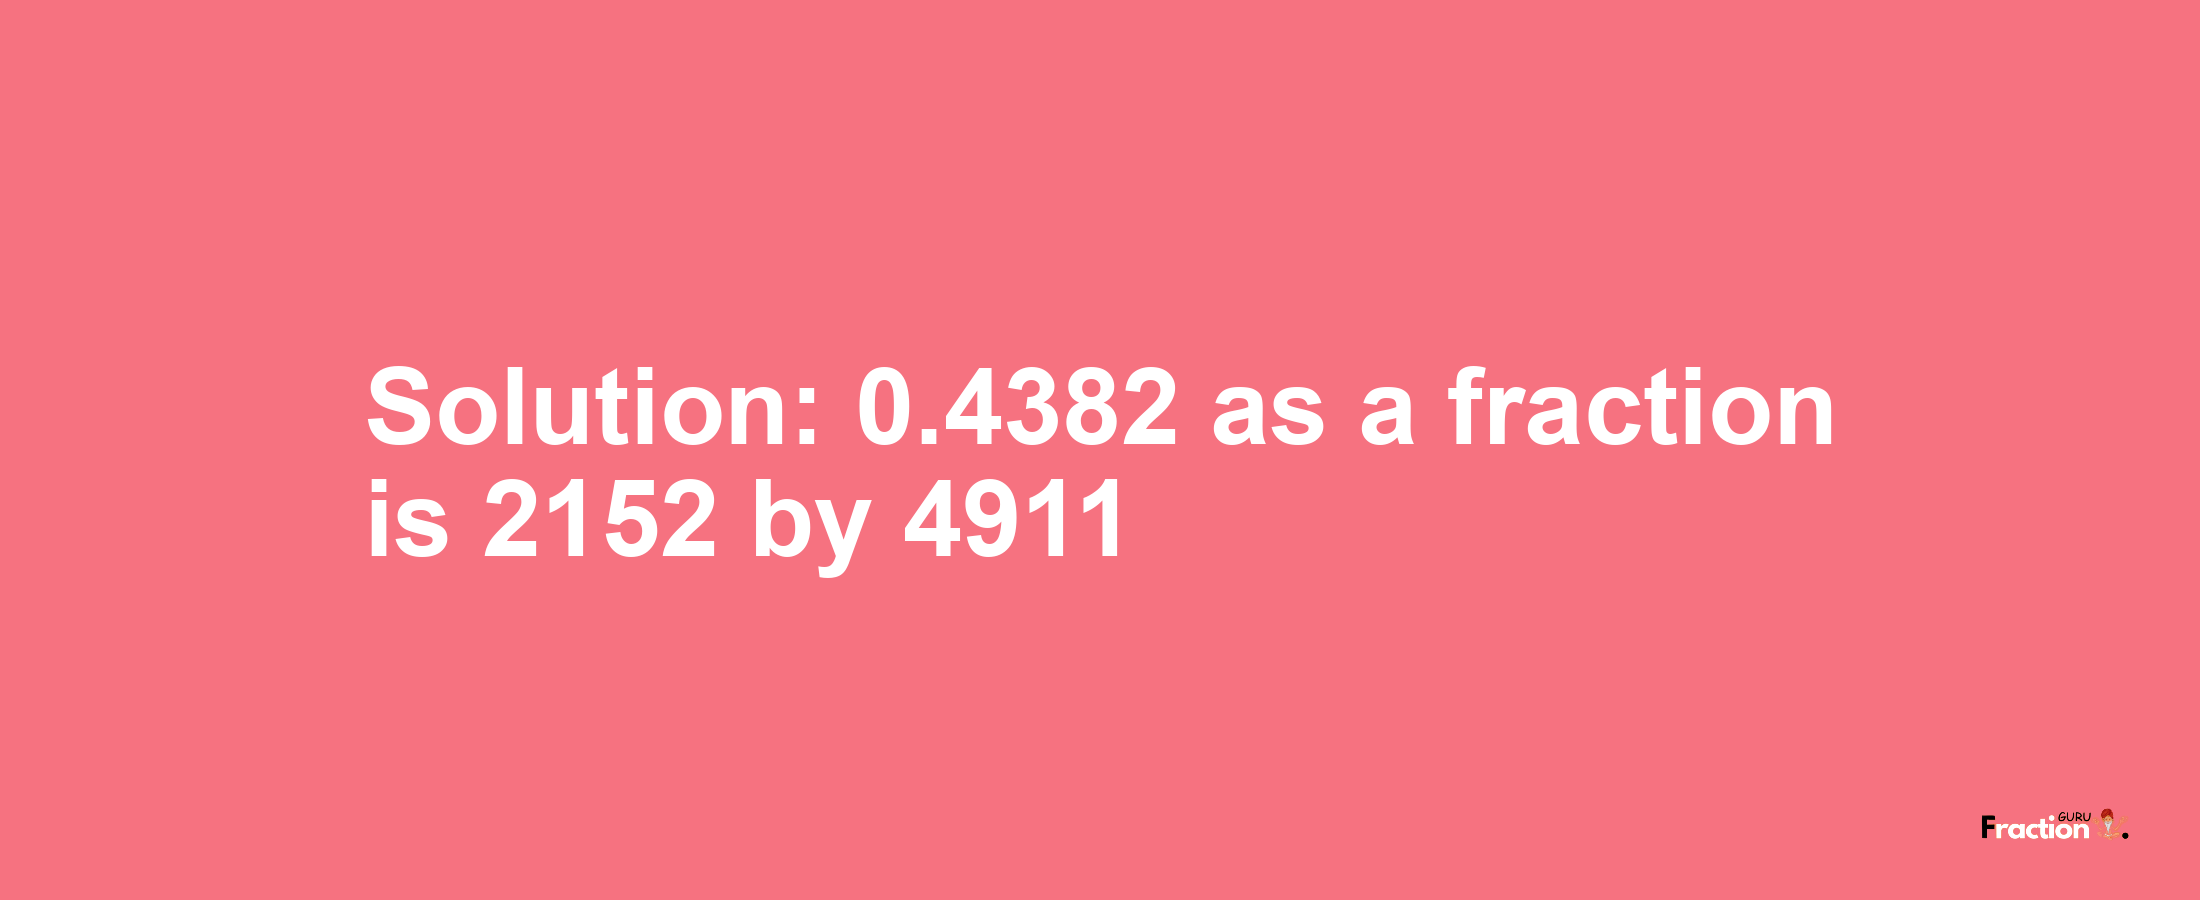 Solution:0.4382 as a fraction is 2152/4911